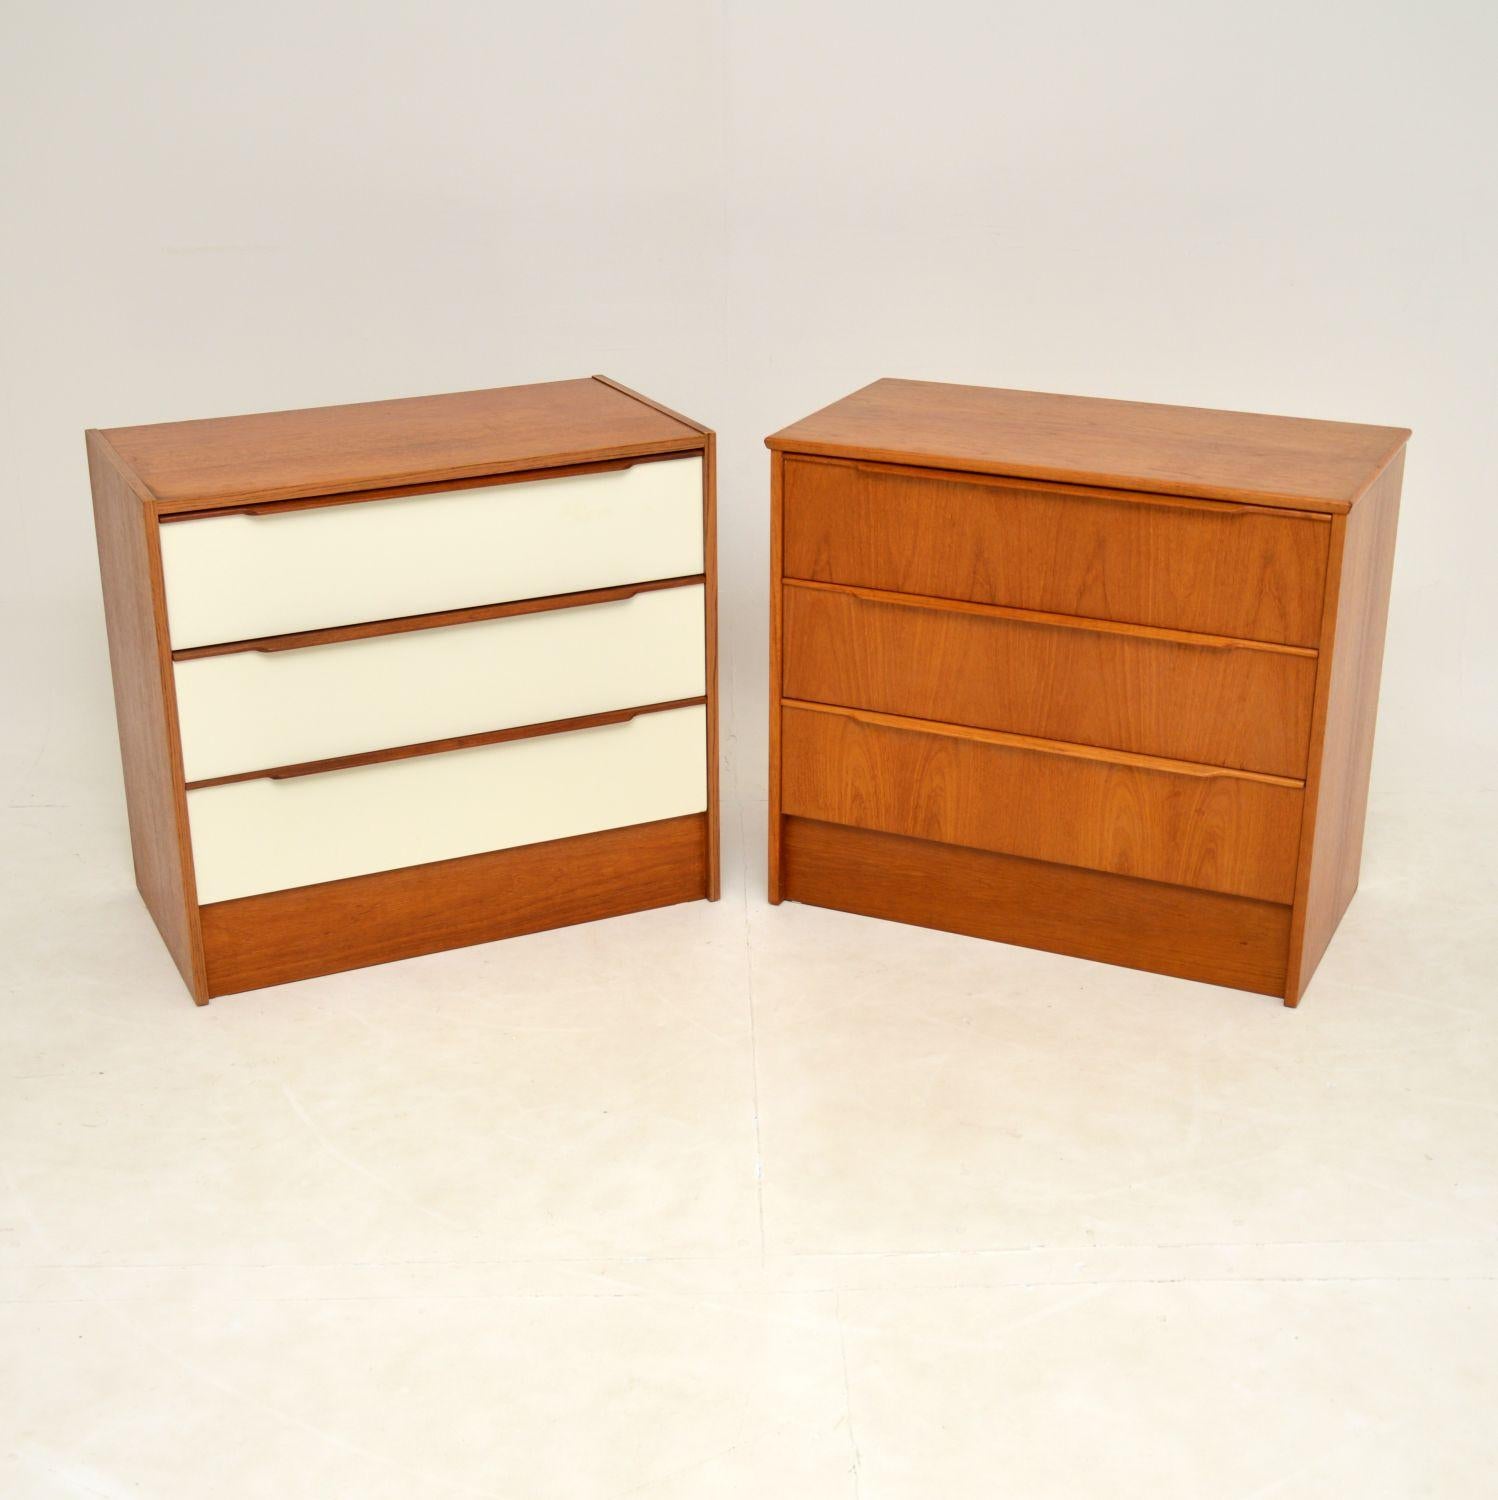 A fabulous pair of vintage Danish chests of drawers in teak. These were made in Denmark in the 1970’s by Steens.
They are identical in size and were made by the same company, one has white formica drawer fronts, the other is completely teak. They